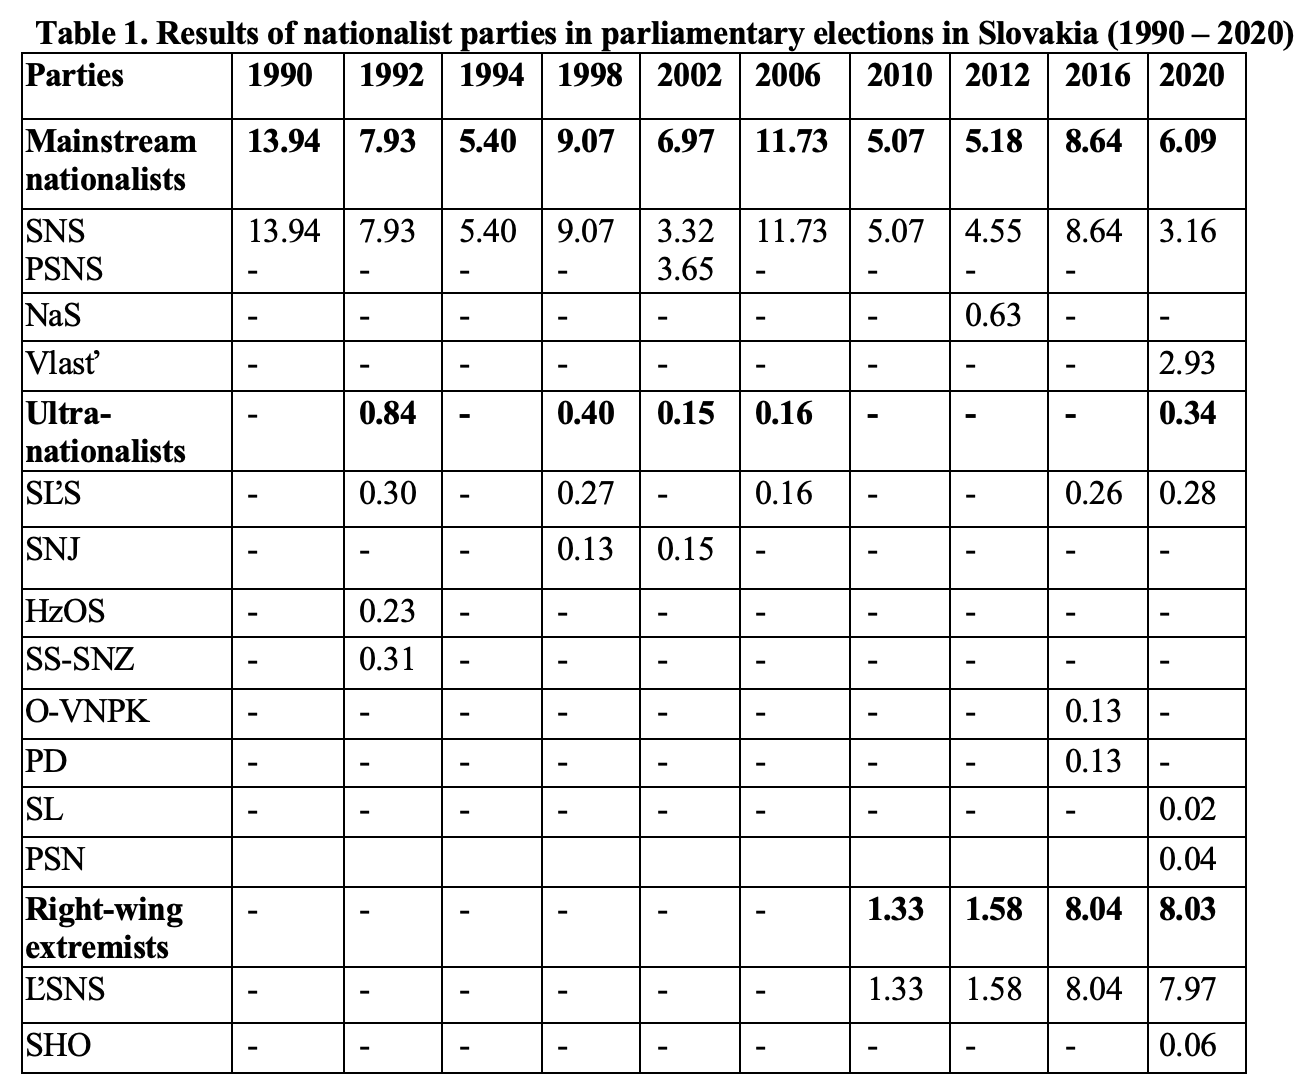 Table 1. Results of nationalist parties in parliamentary elections in Slovakia (1990 – 2020)